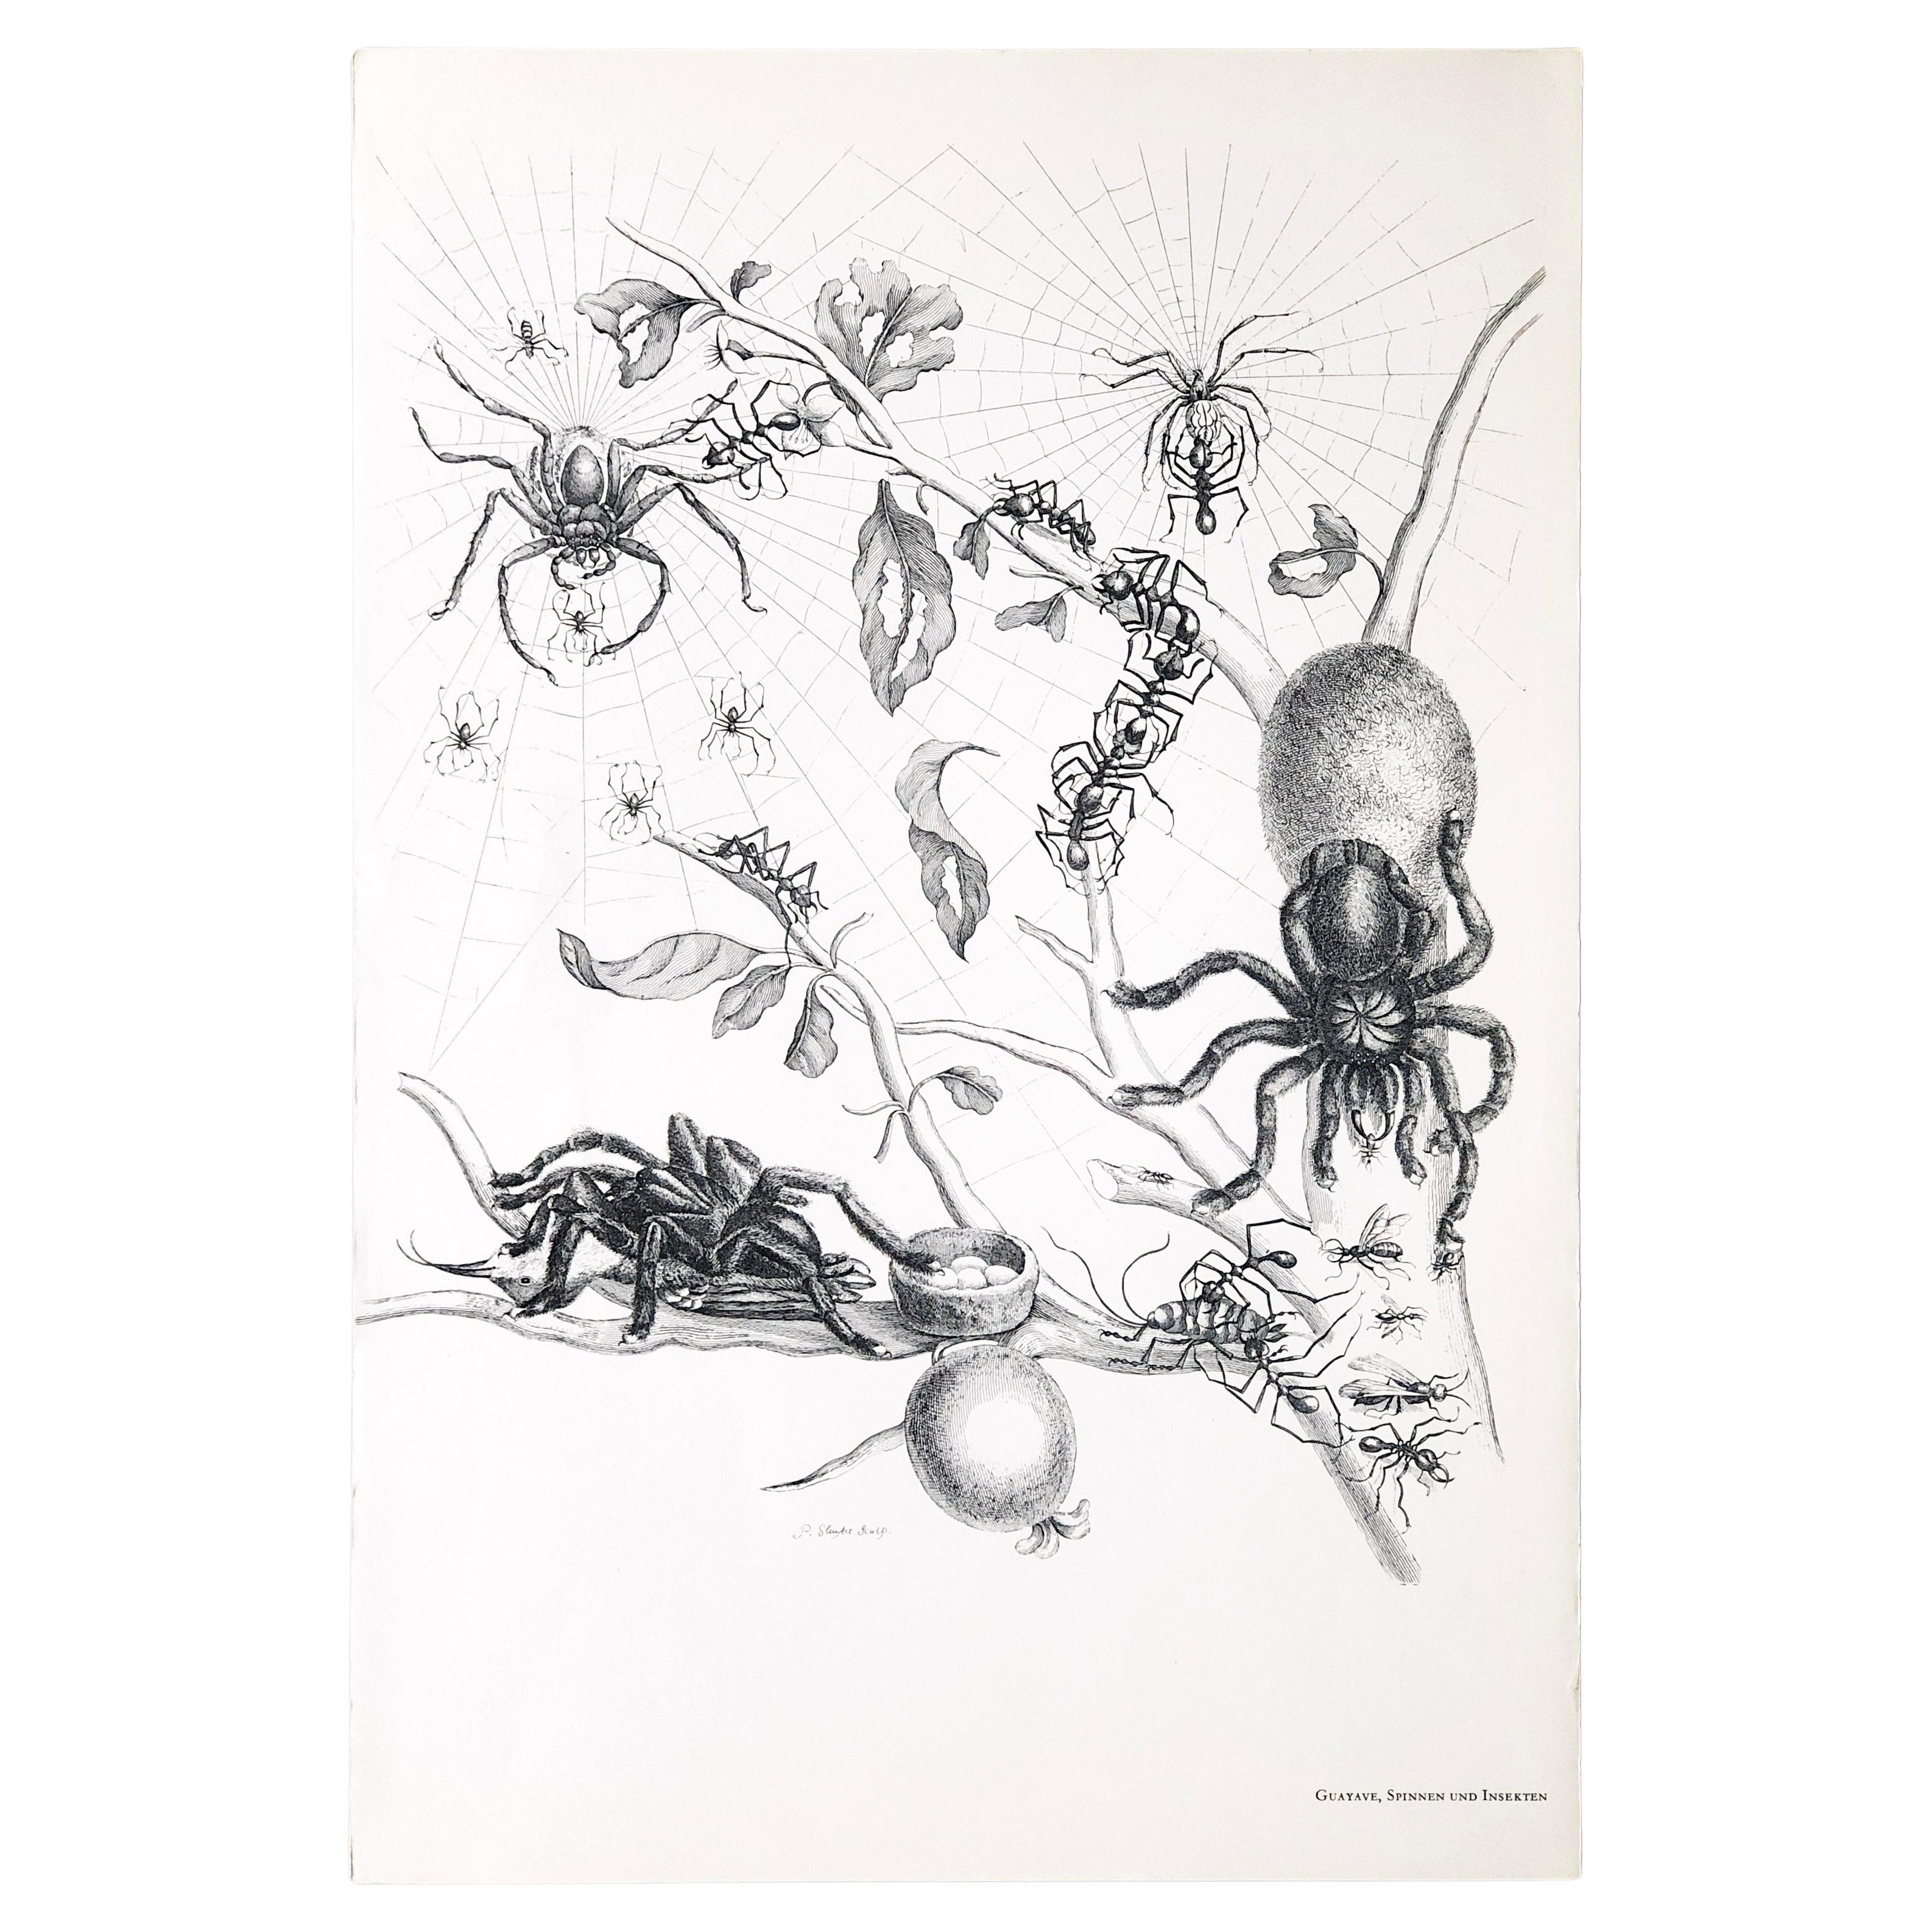 Maria Sibylla Merian - P. Sluyter Sculp - Guayave spiders and insects Nr. 18 For Sale